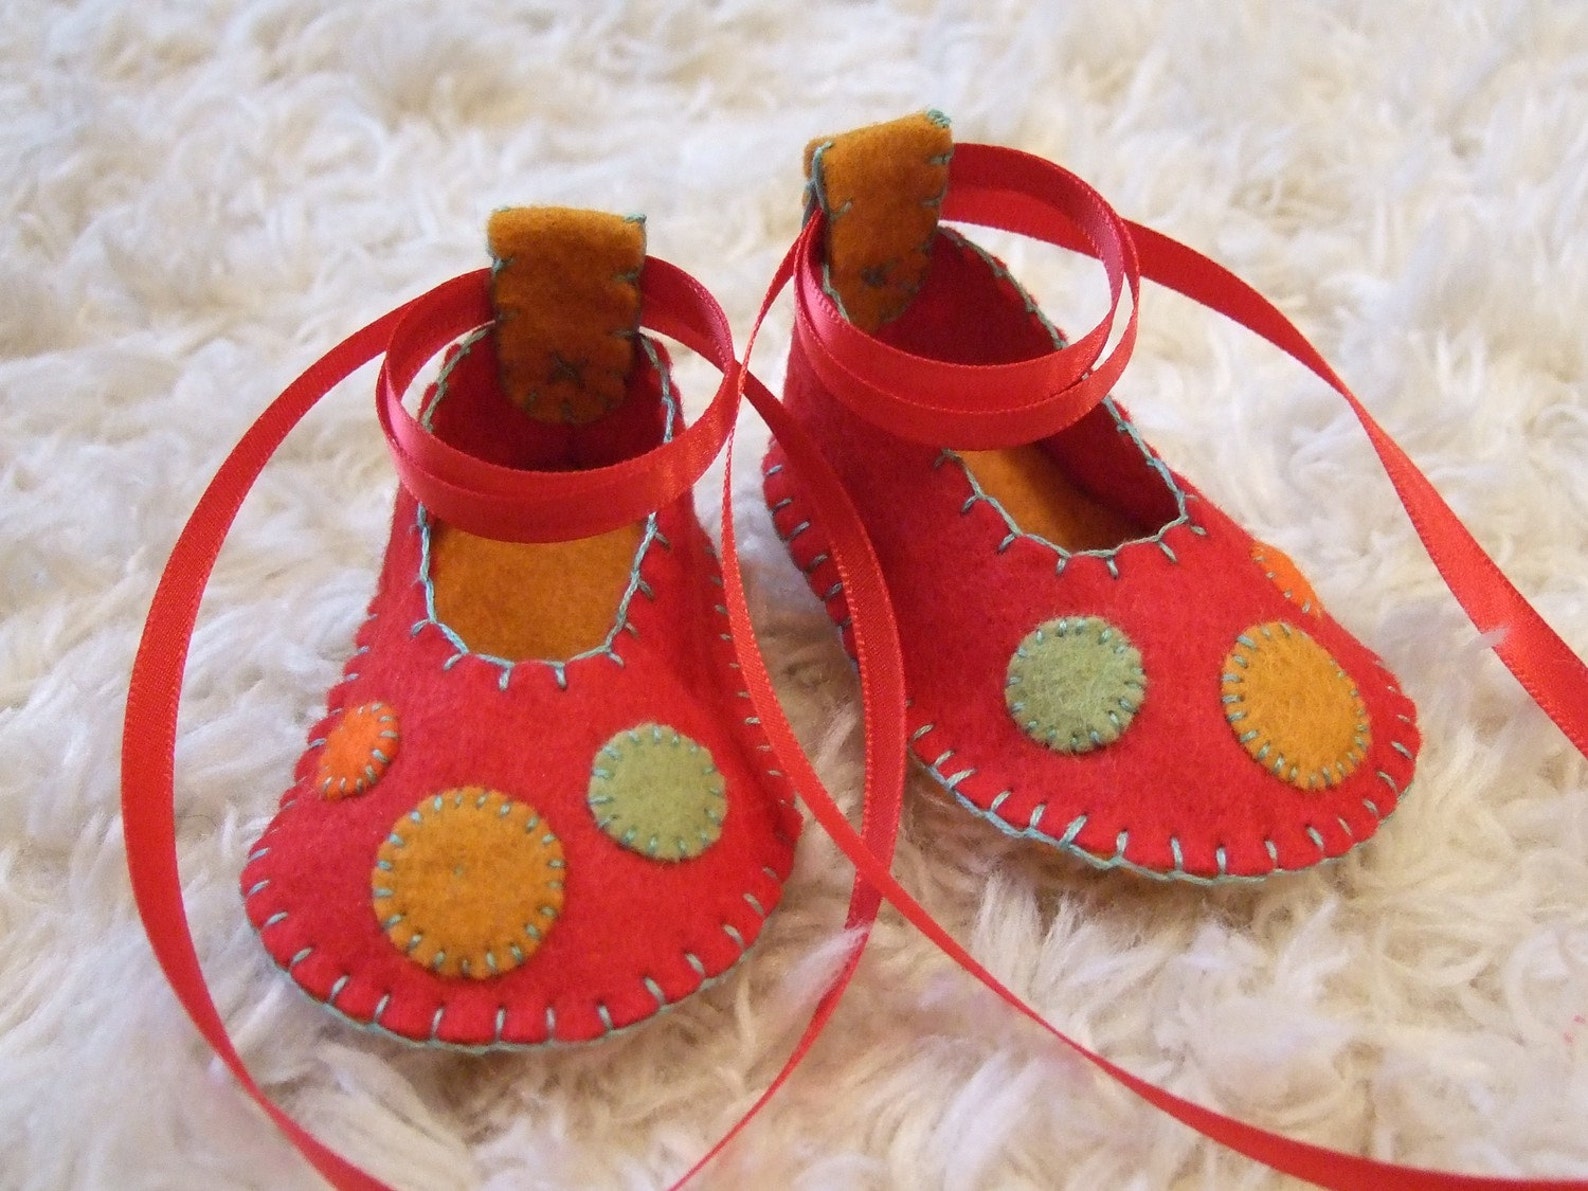 candy apple red ballet flats - felt baby shoes - can be personalized